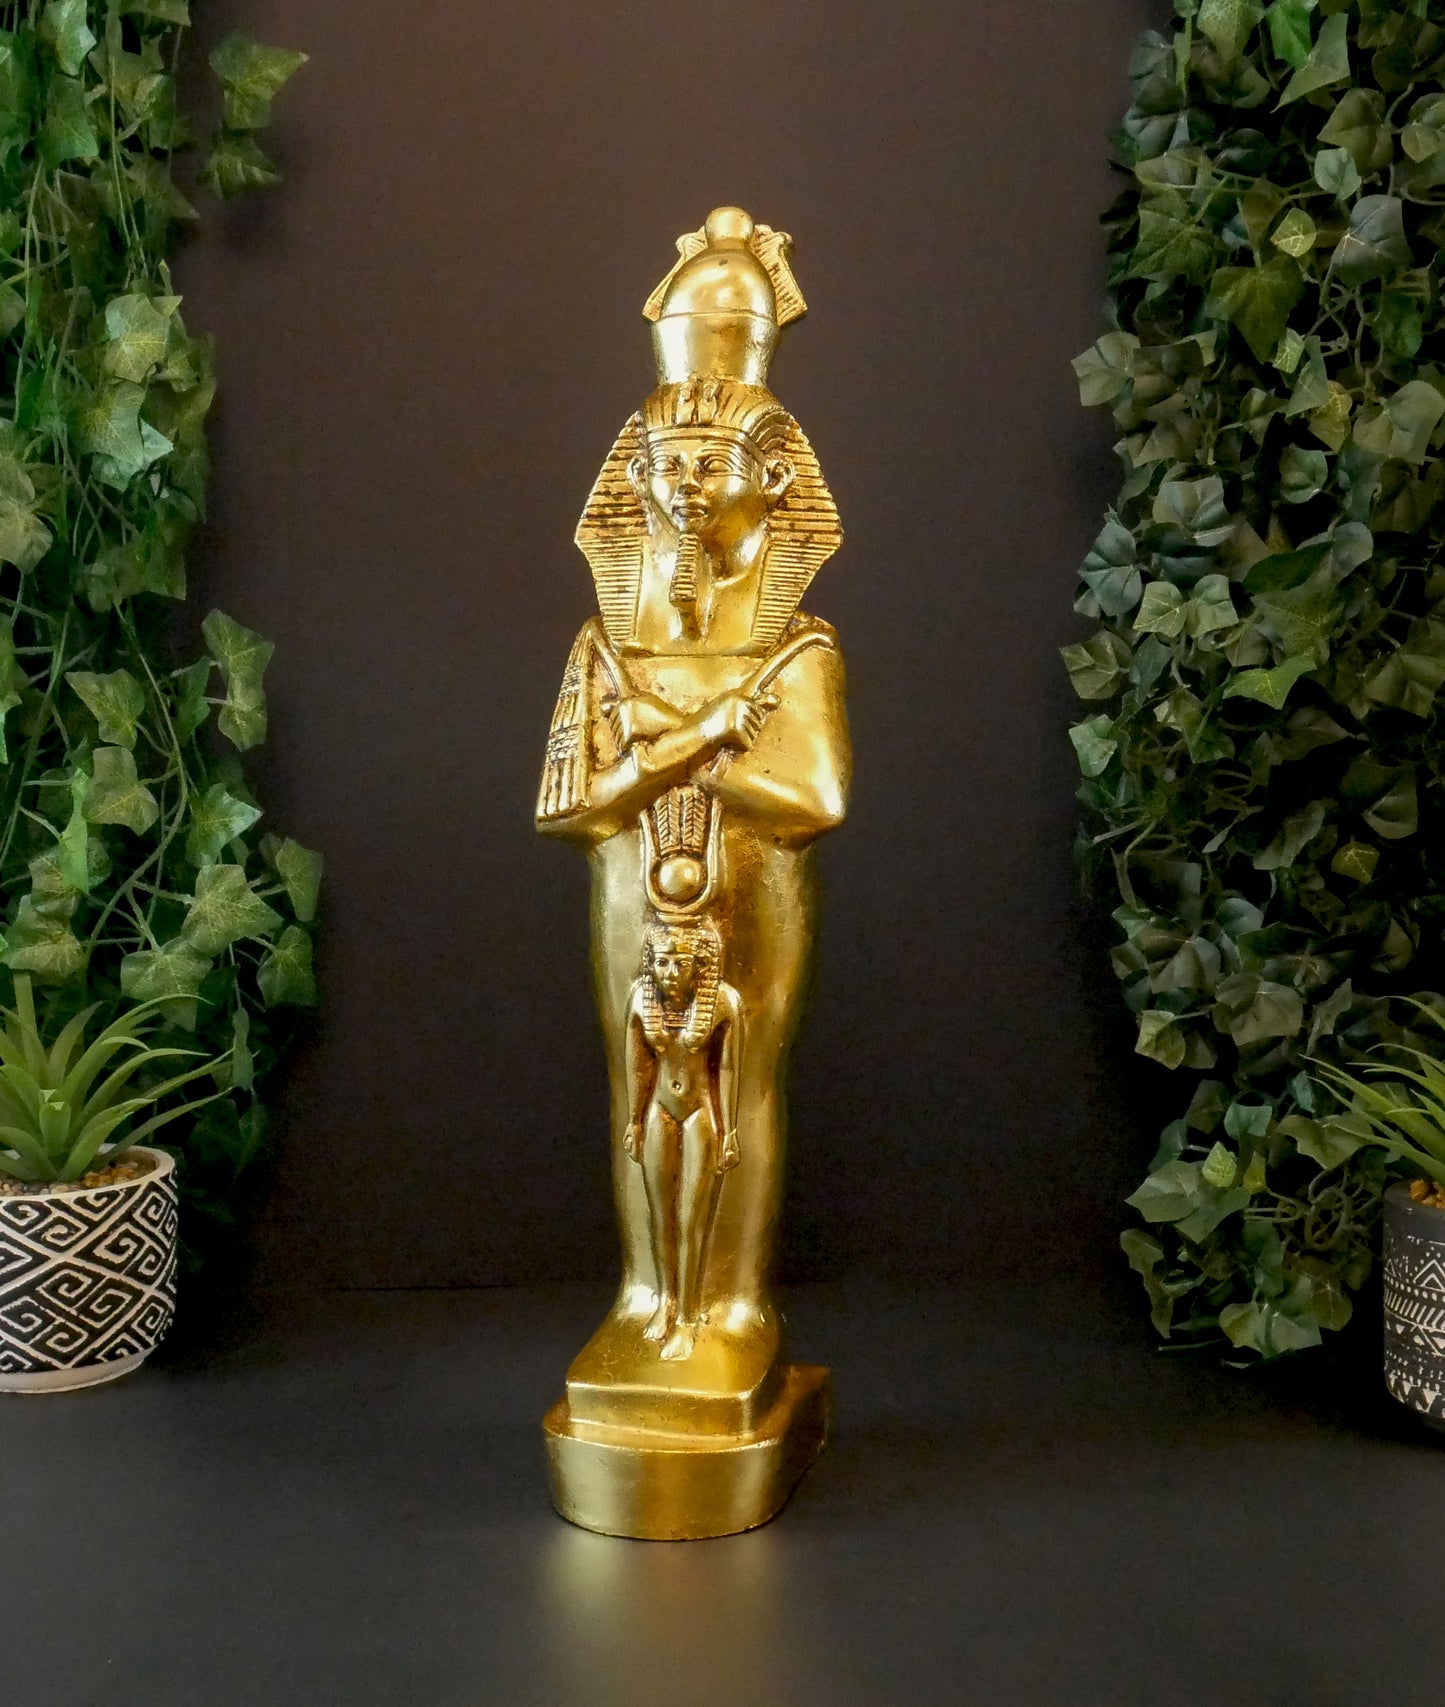 Gold Leaf King Tut Sculpture Statue | Egyptian Vintage Collectible Home Decor Gift